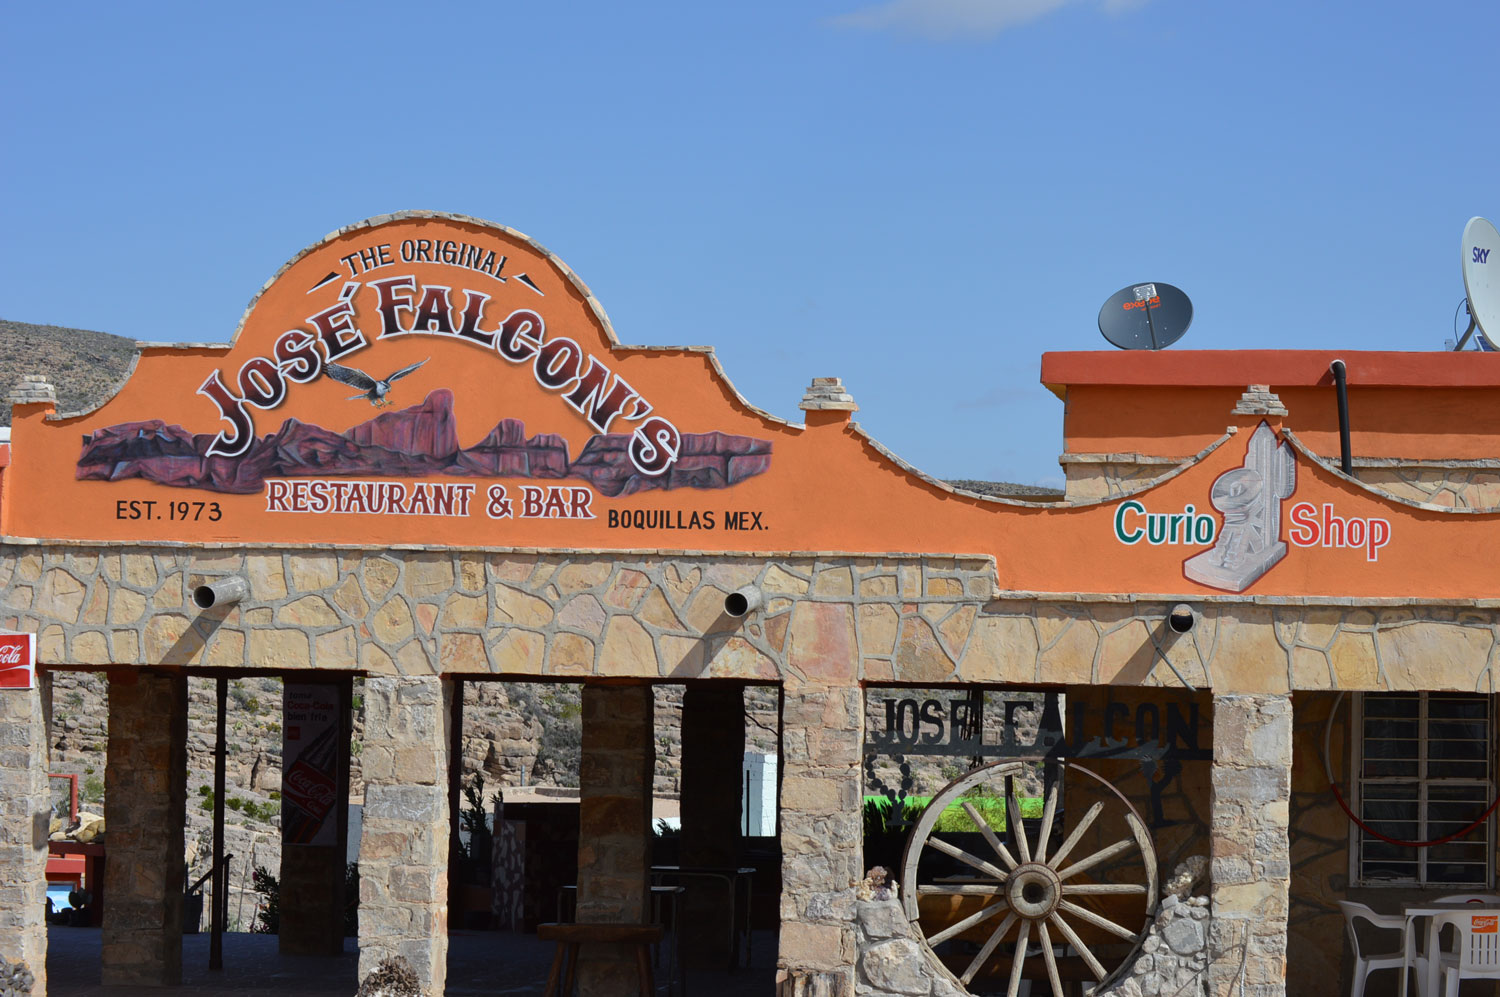 Front of José Falcon Restaurant in Boquillas, Mexico, with a sign painted mostly orange background and scenes of the Sierra del Carmen mountains. Building is made from rock with old wagon wheel decor mounted between porch pillars